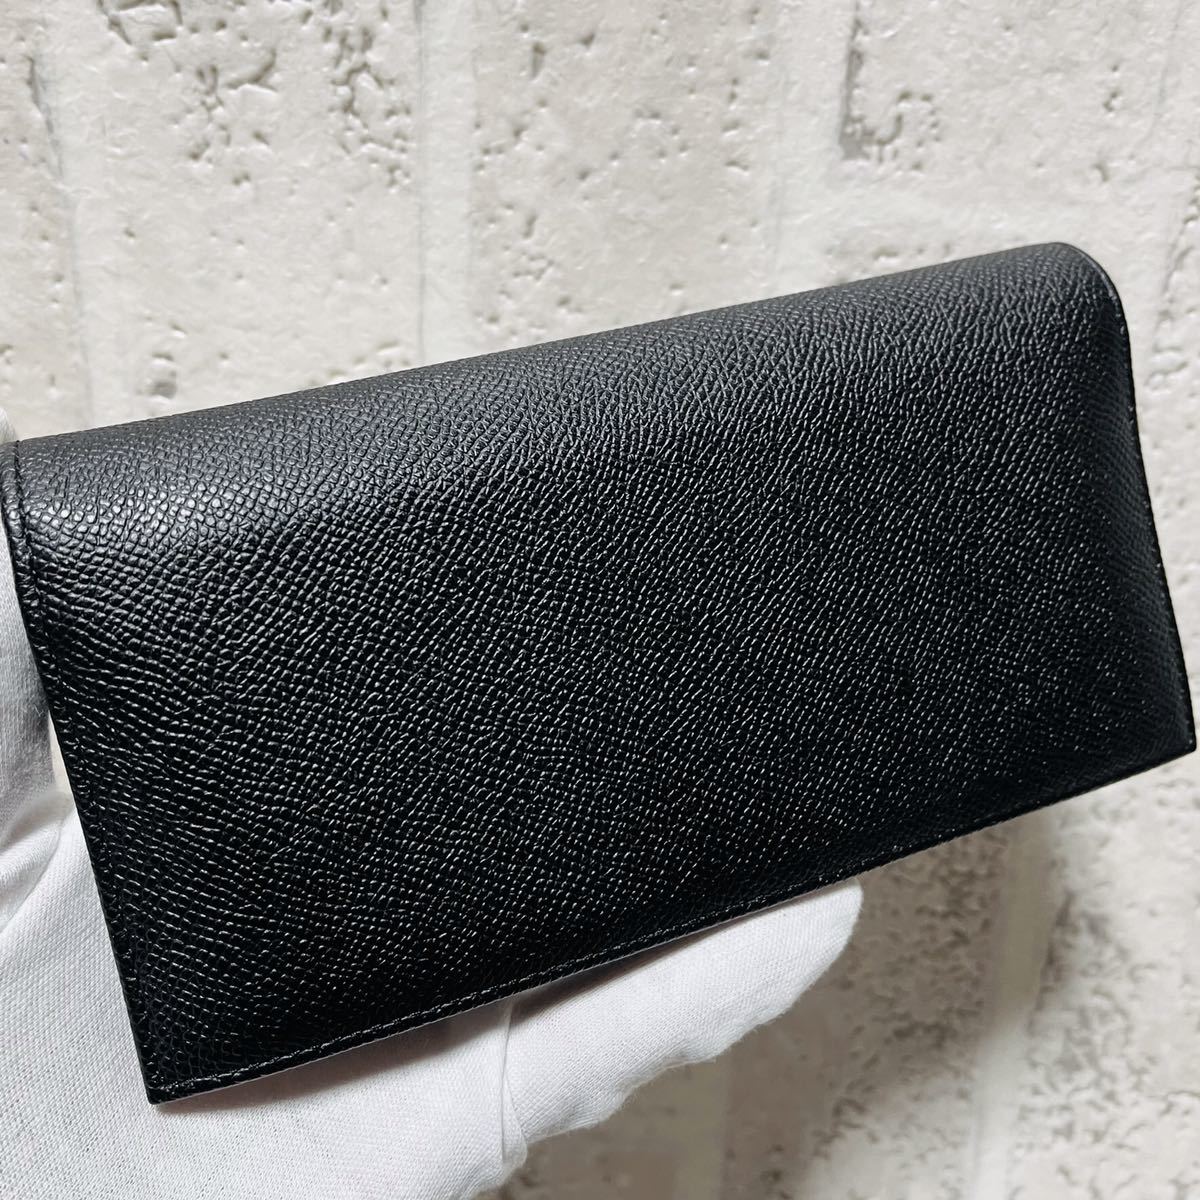  almost unused beautiful goods Dolce & Gabbana long wallet long wallet black men's lady's unisex original leather Italy made 8629